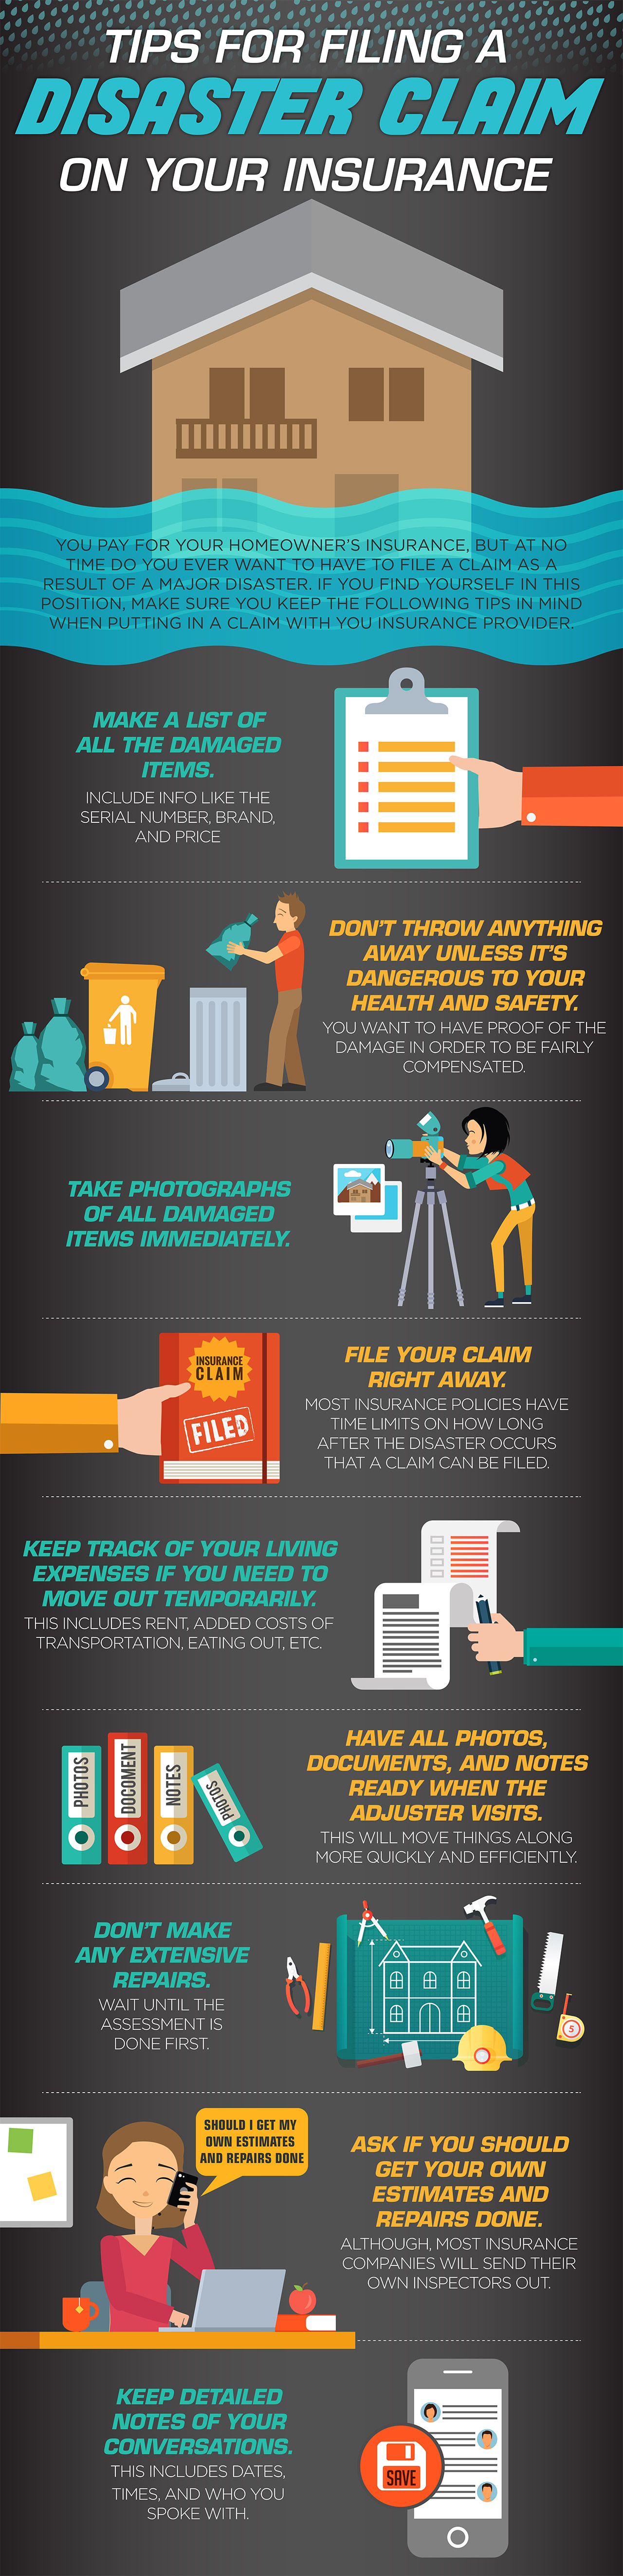 infographic-tips-for-filing-a-disaster-claim-on-your-insurance-article